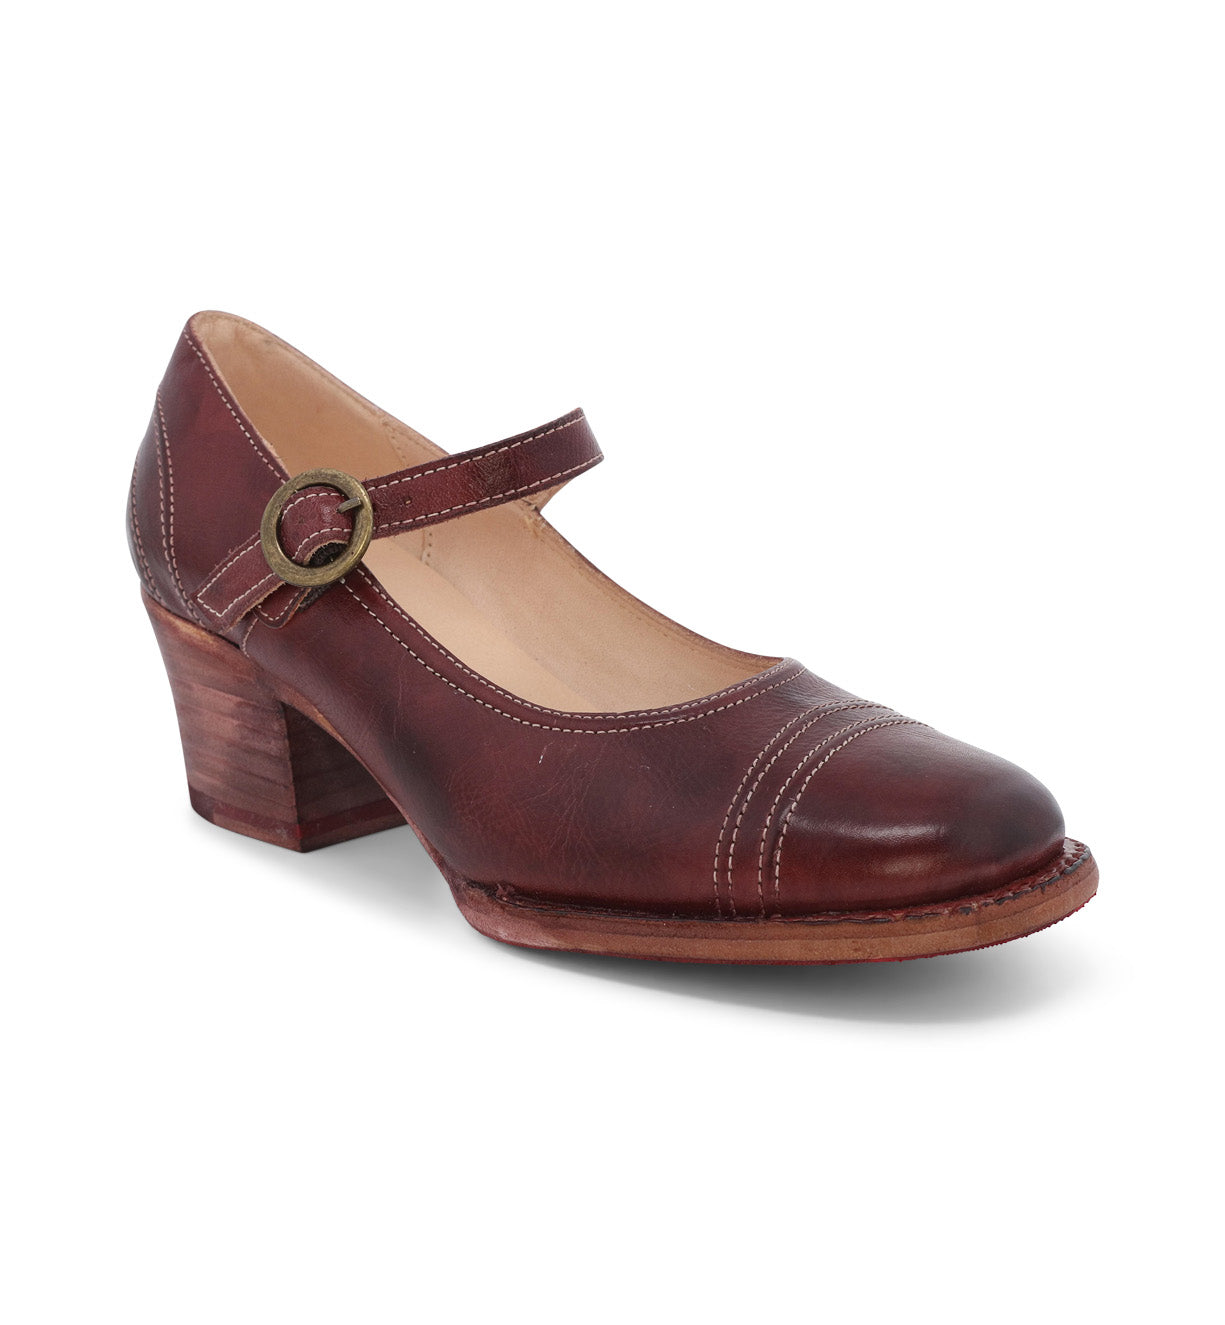 An Oak Tree Farms women's Mary Jane style shoe with a wooden heel, made of leather.